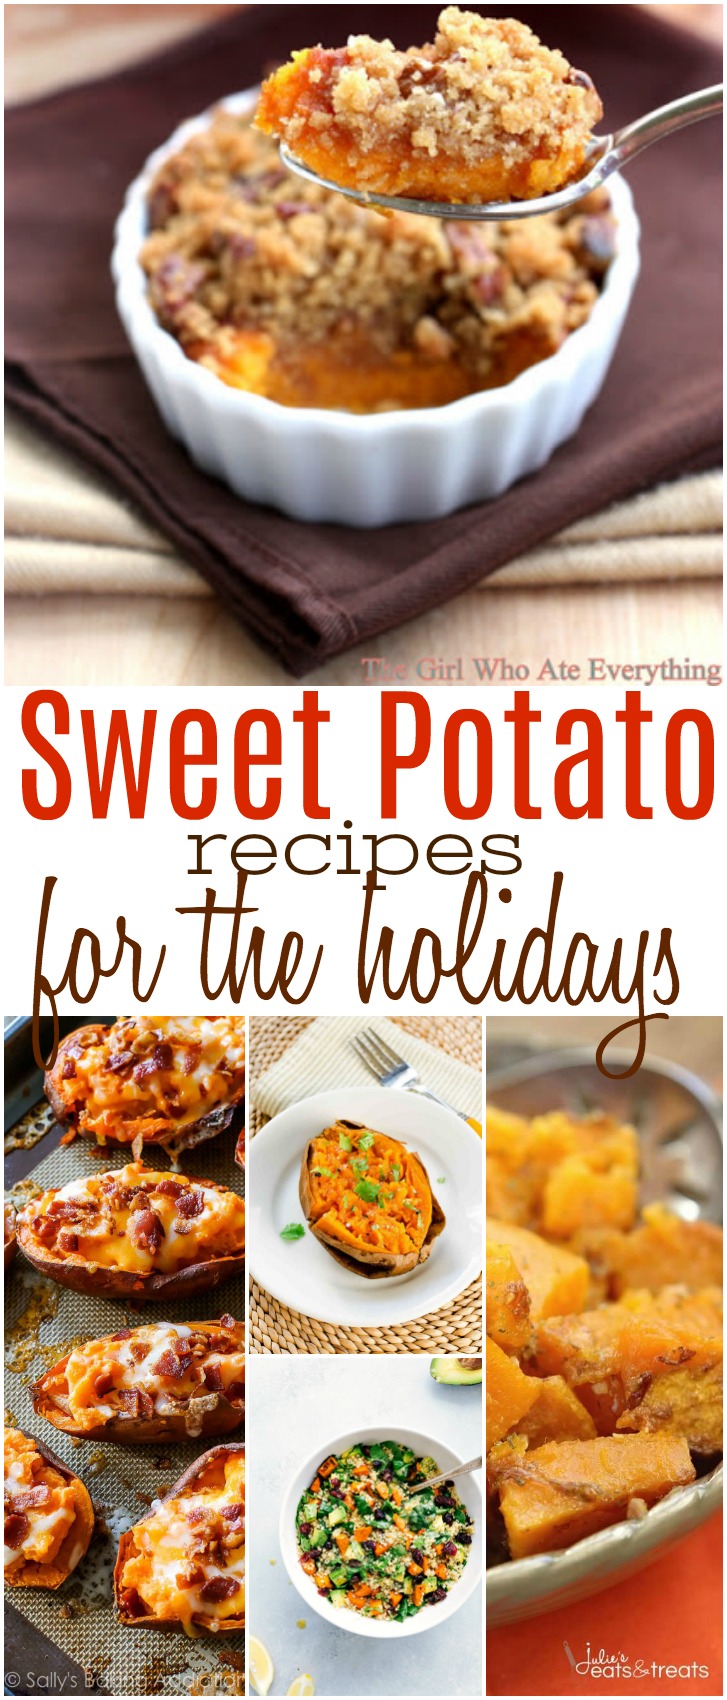 Sweet Potatoes are full of potassium, vitamins and even fiber - perfect to have in your kitchen! Here are over 15 Sweet Potato Recipes you'll want to keep handy for the holidays!  #SweetPotatoes 